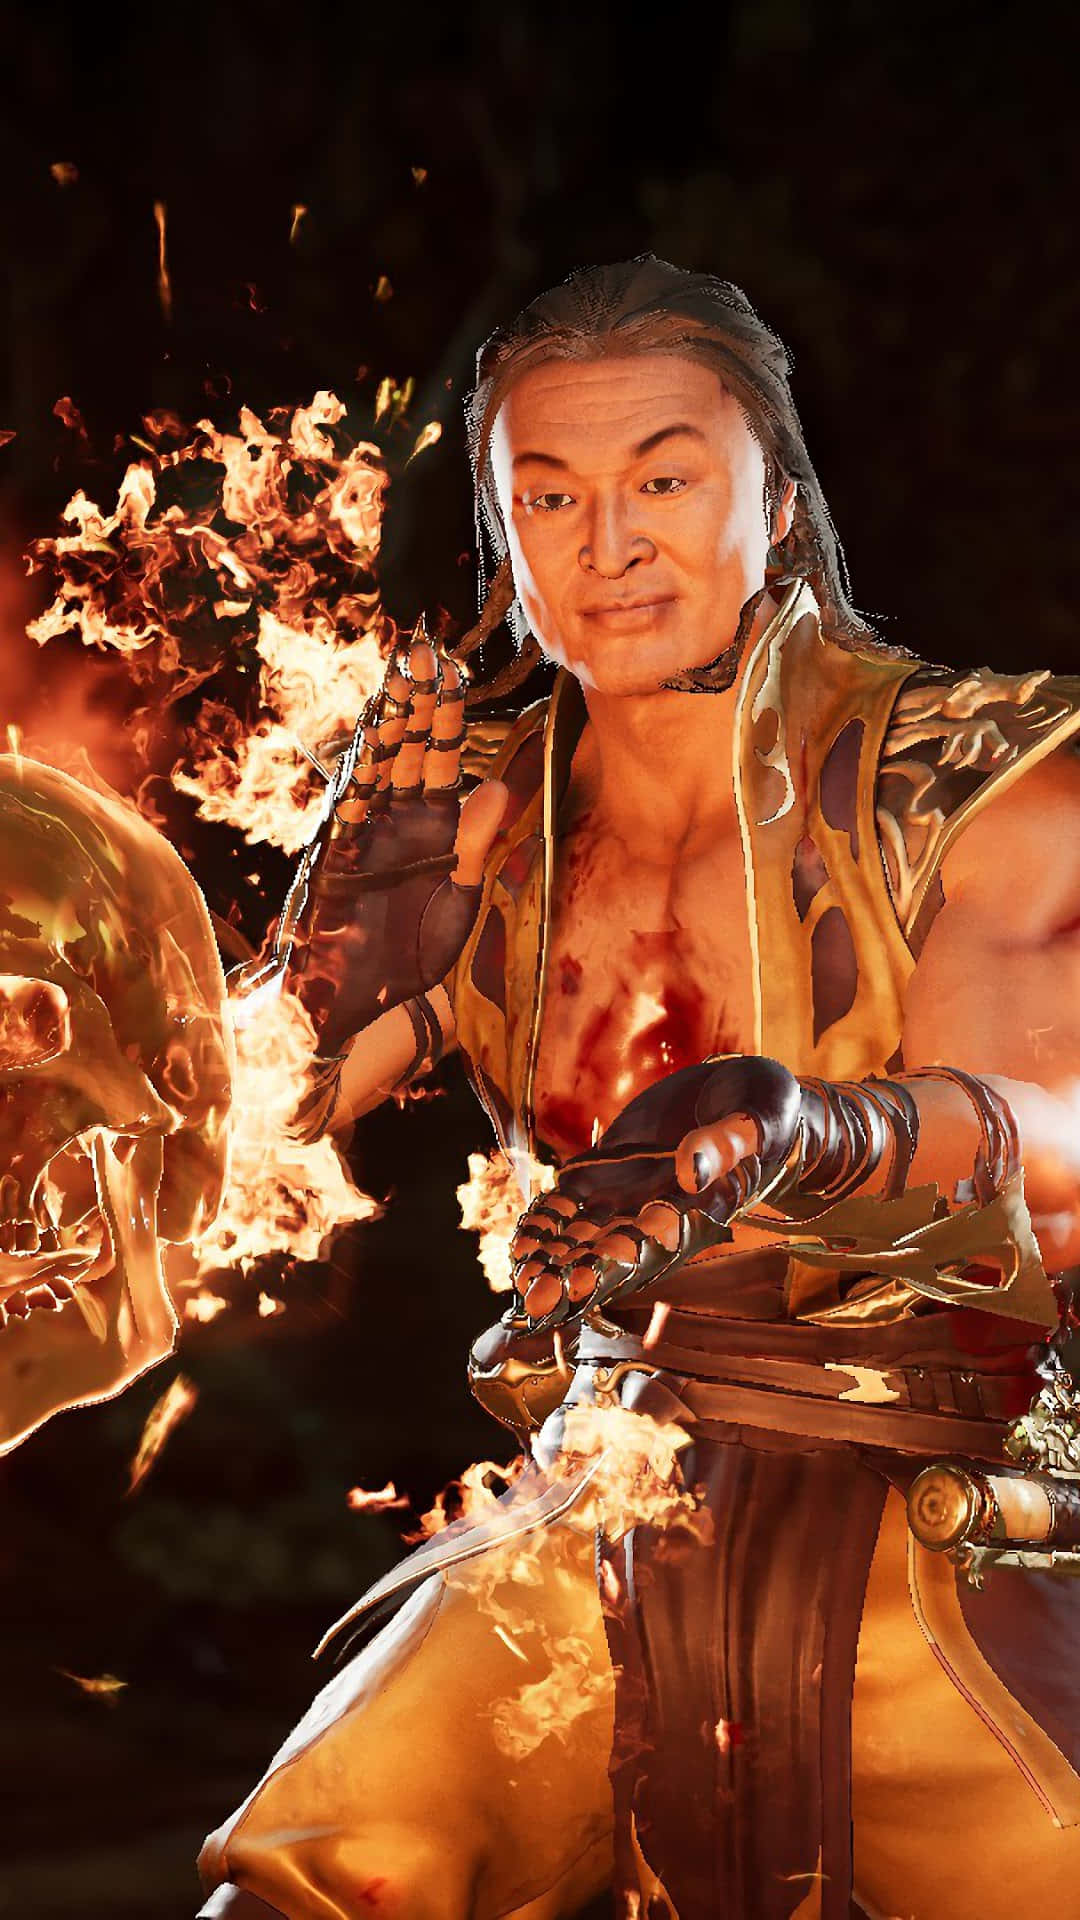 Shang Tsung Posters for Sale